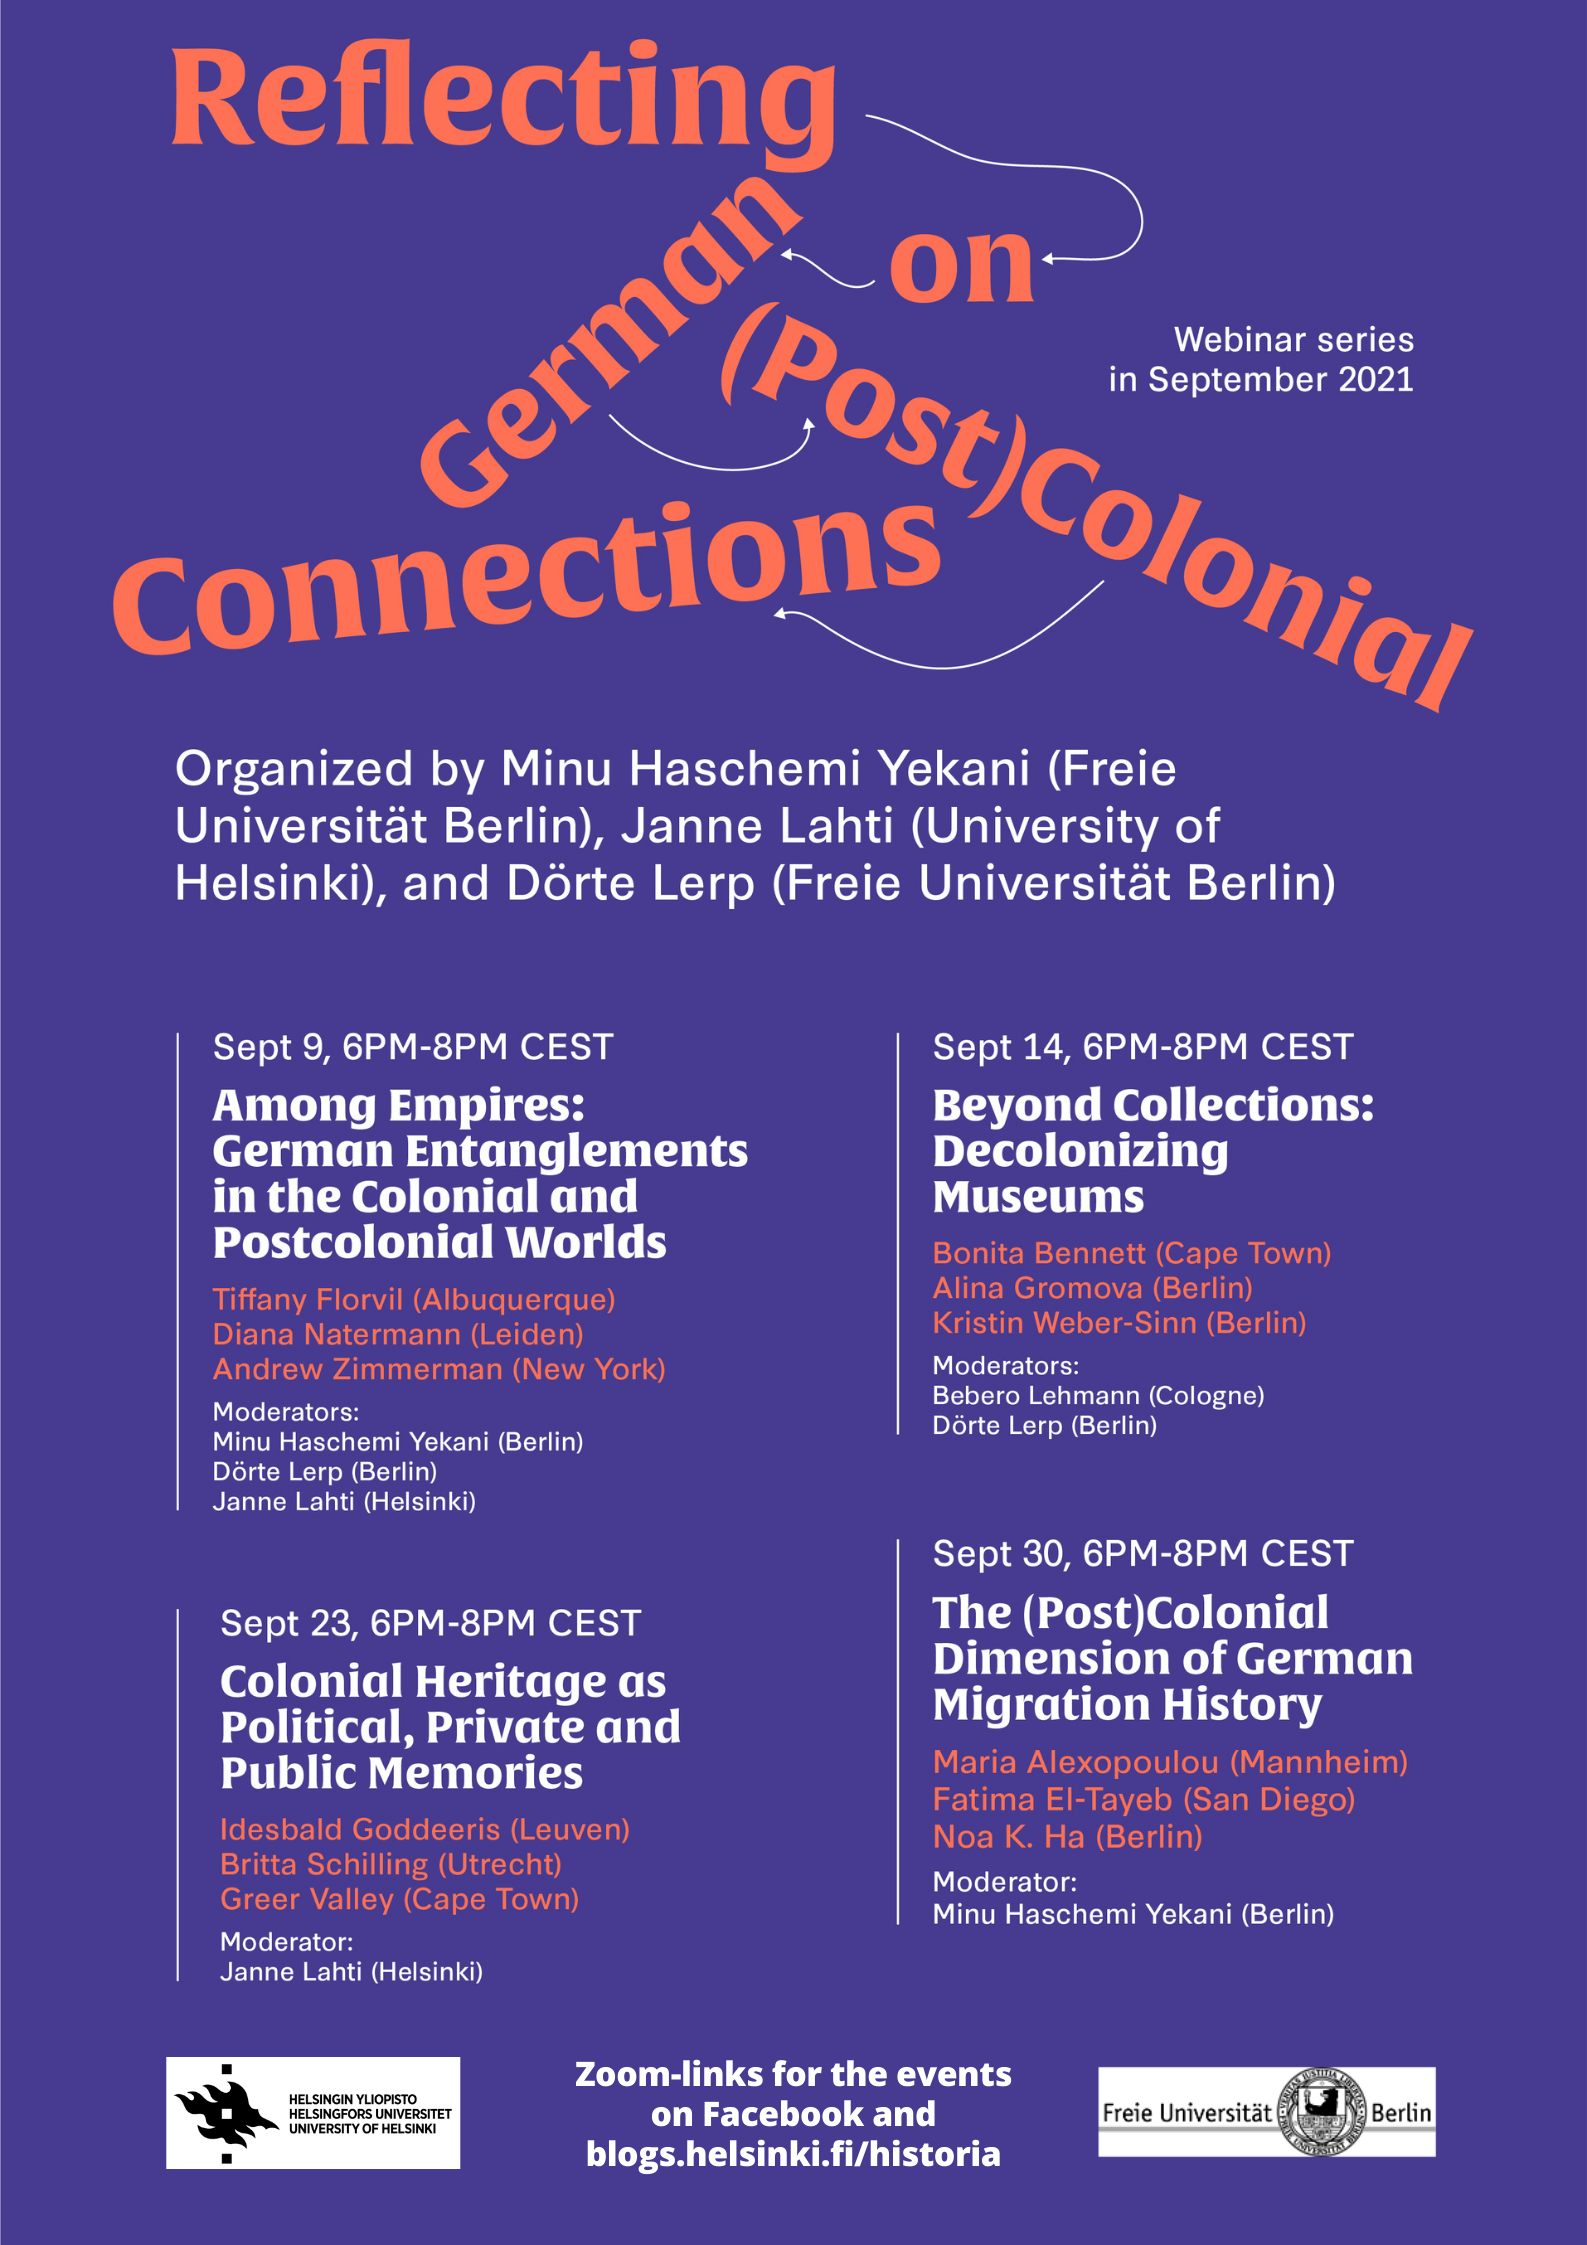 Webinar series "Reflecting on German (Post)Colonial Connections"